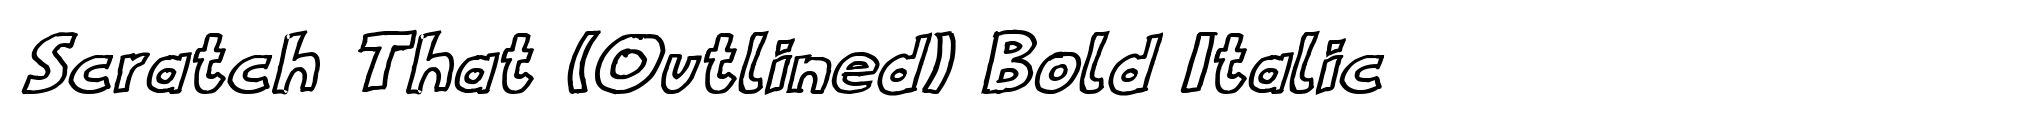 Scratch That (Outlined) Bold Italic image